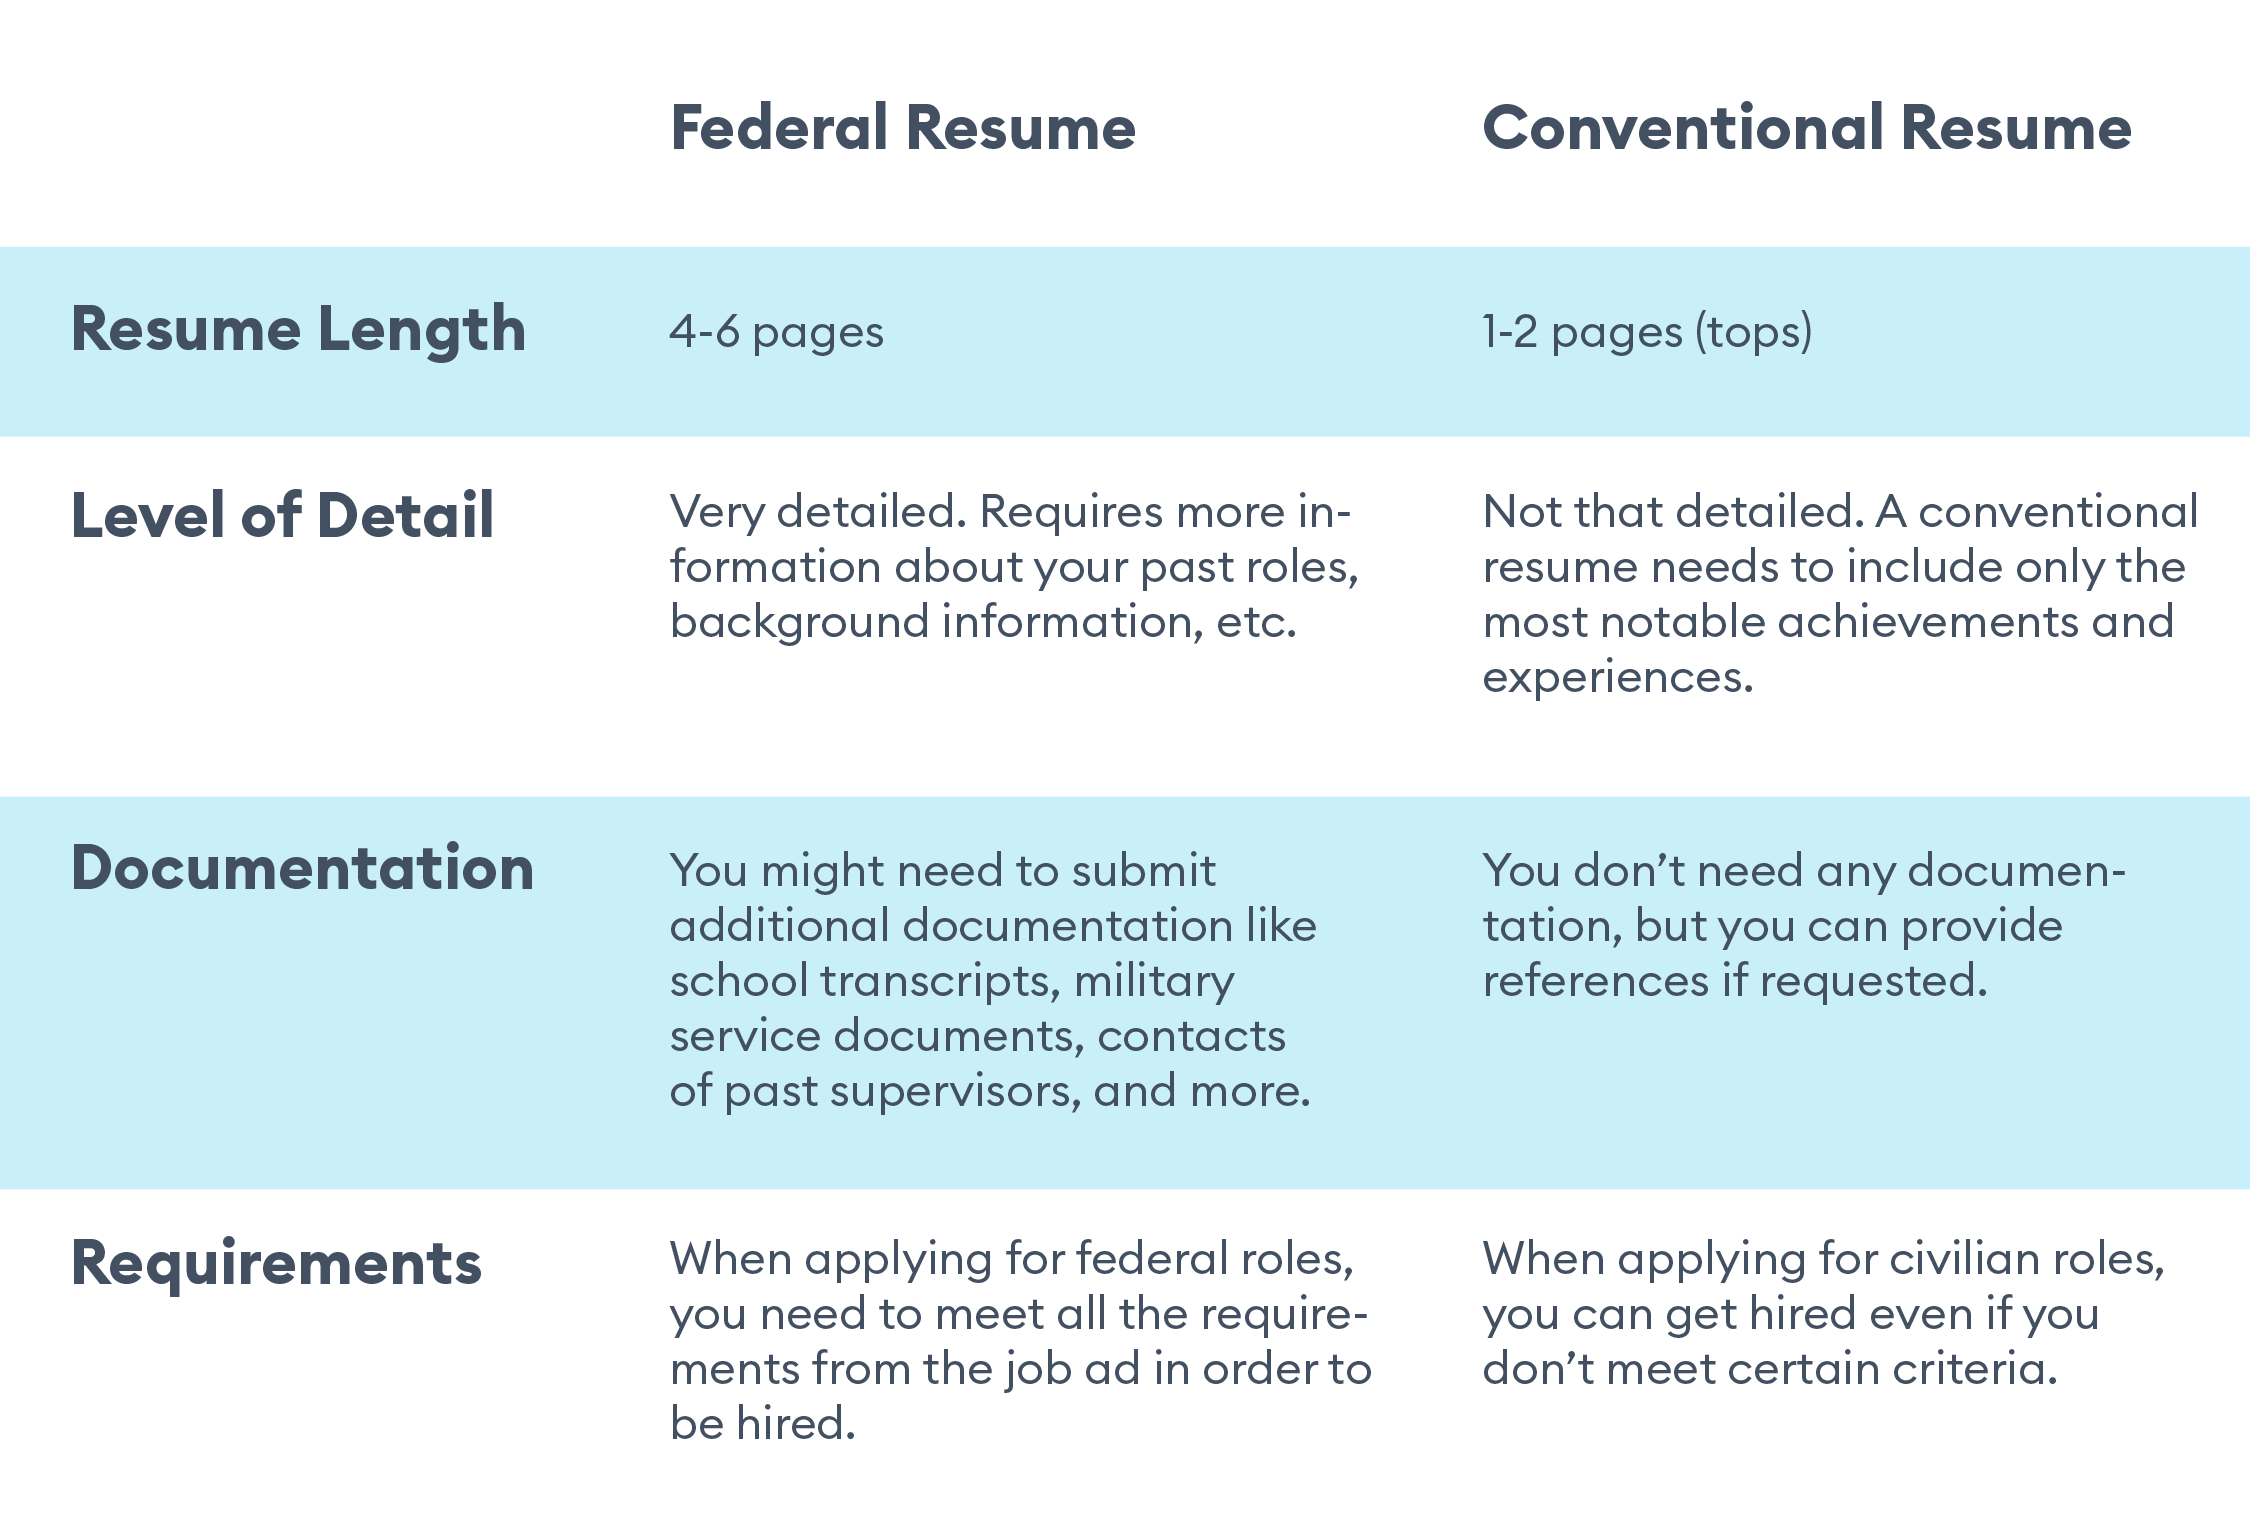 federal resume differences